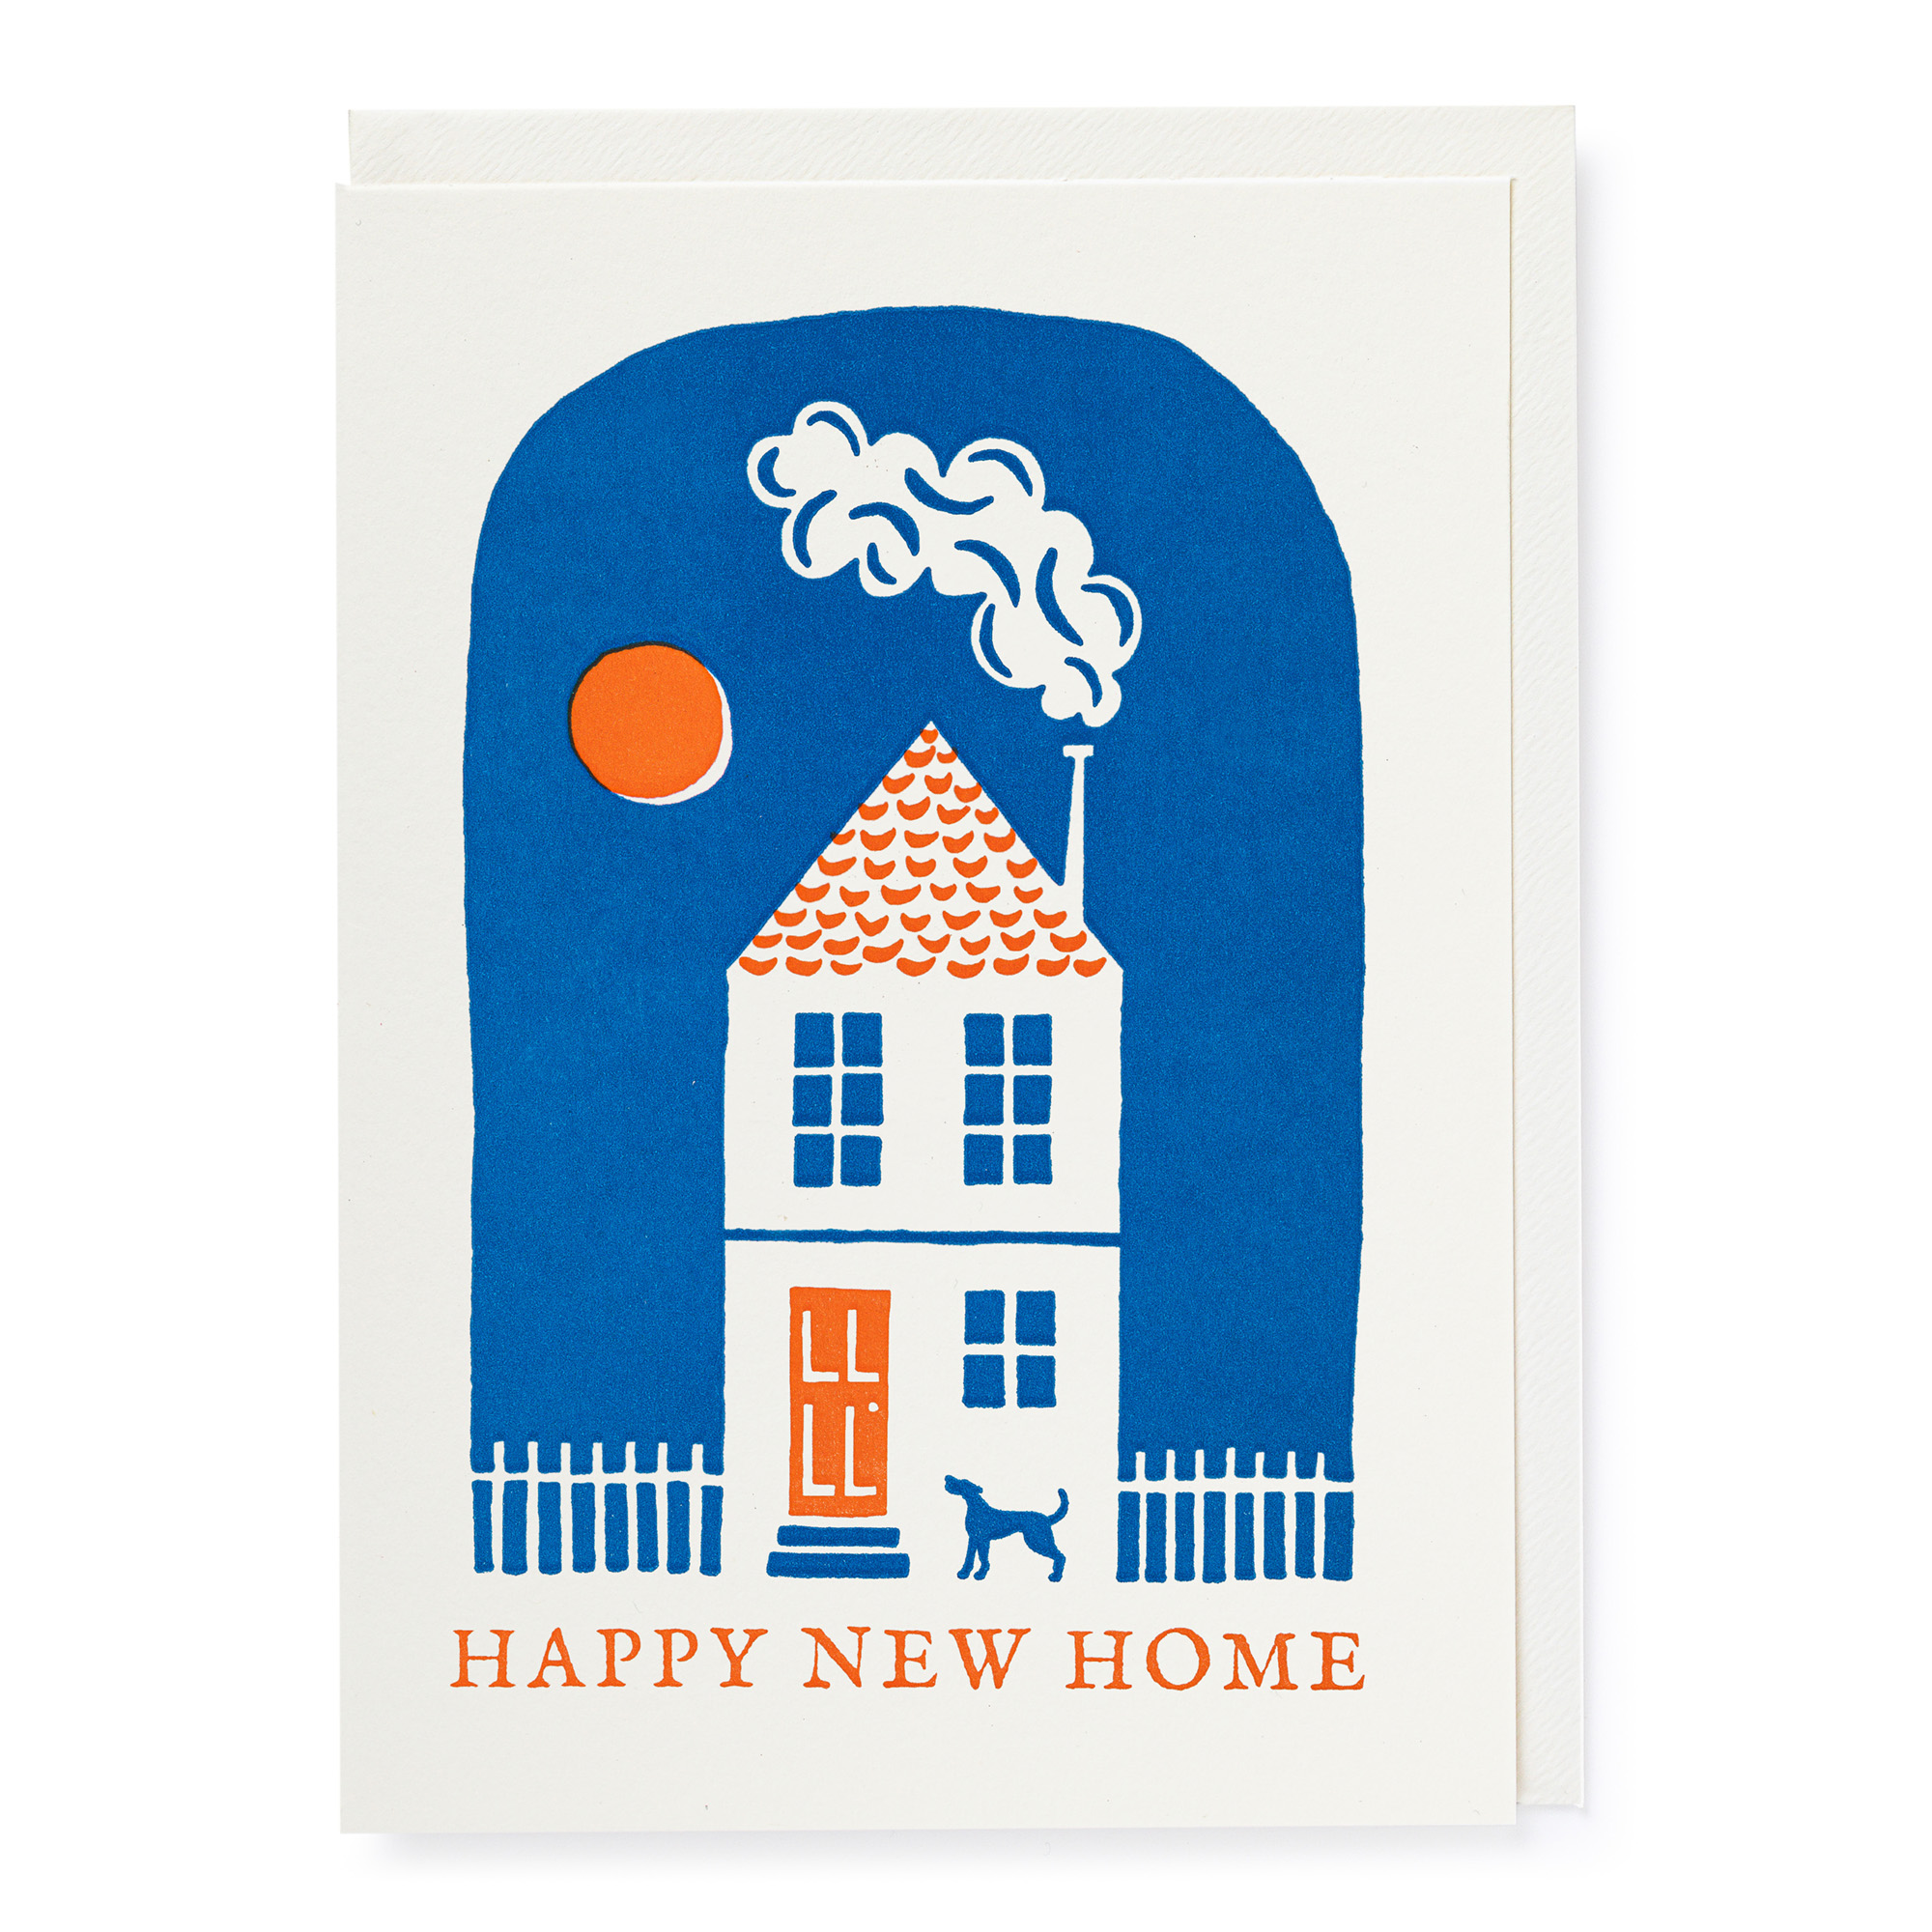 Happy New Home - Letterpress Cards - Ariana Martin - from Archivist Gallery 